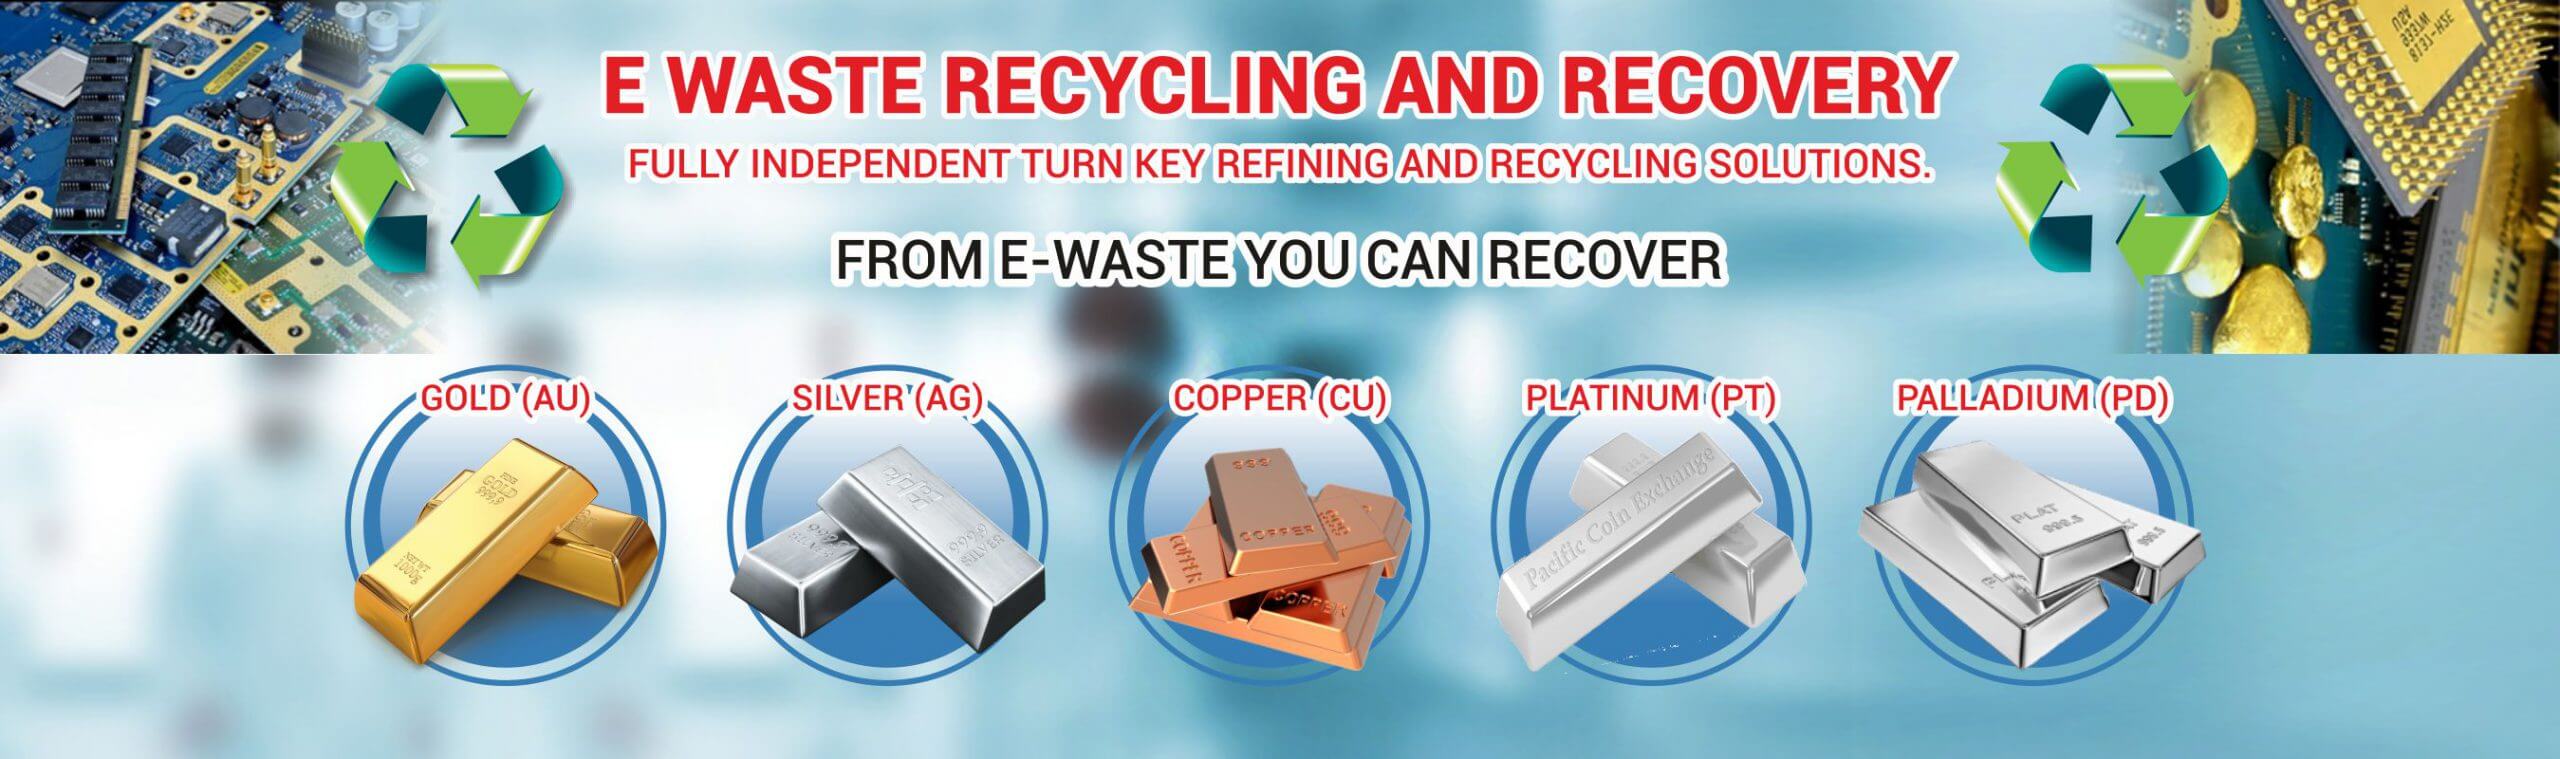 E-waste recycling & Recovery System